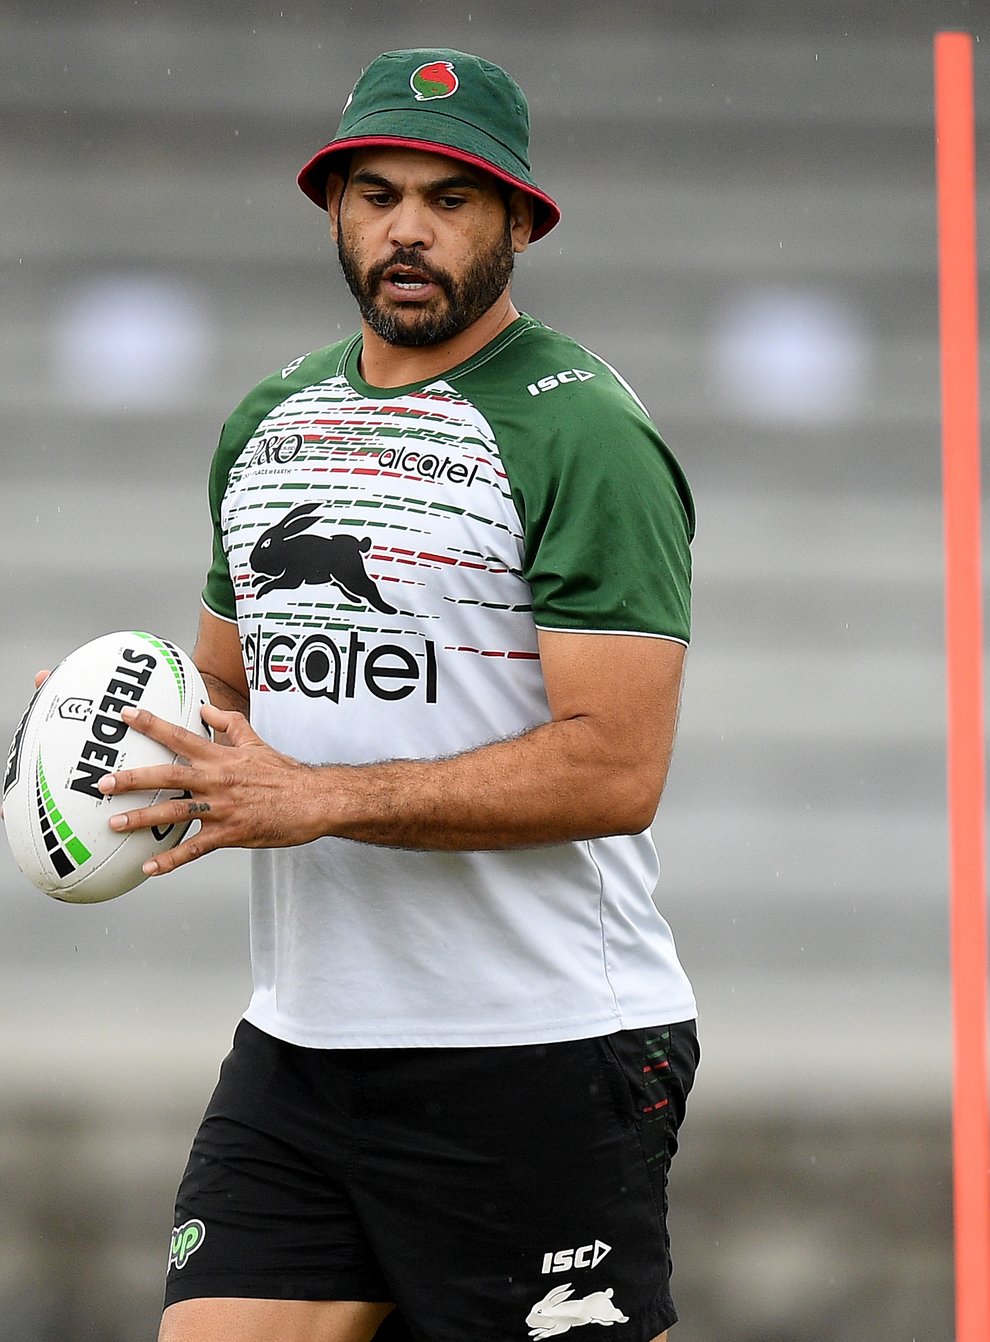 Inglis will play in the Super League next season 